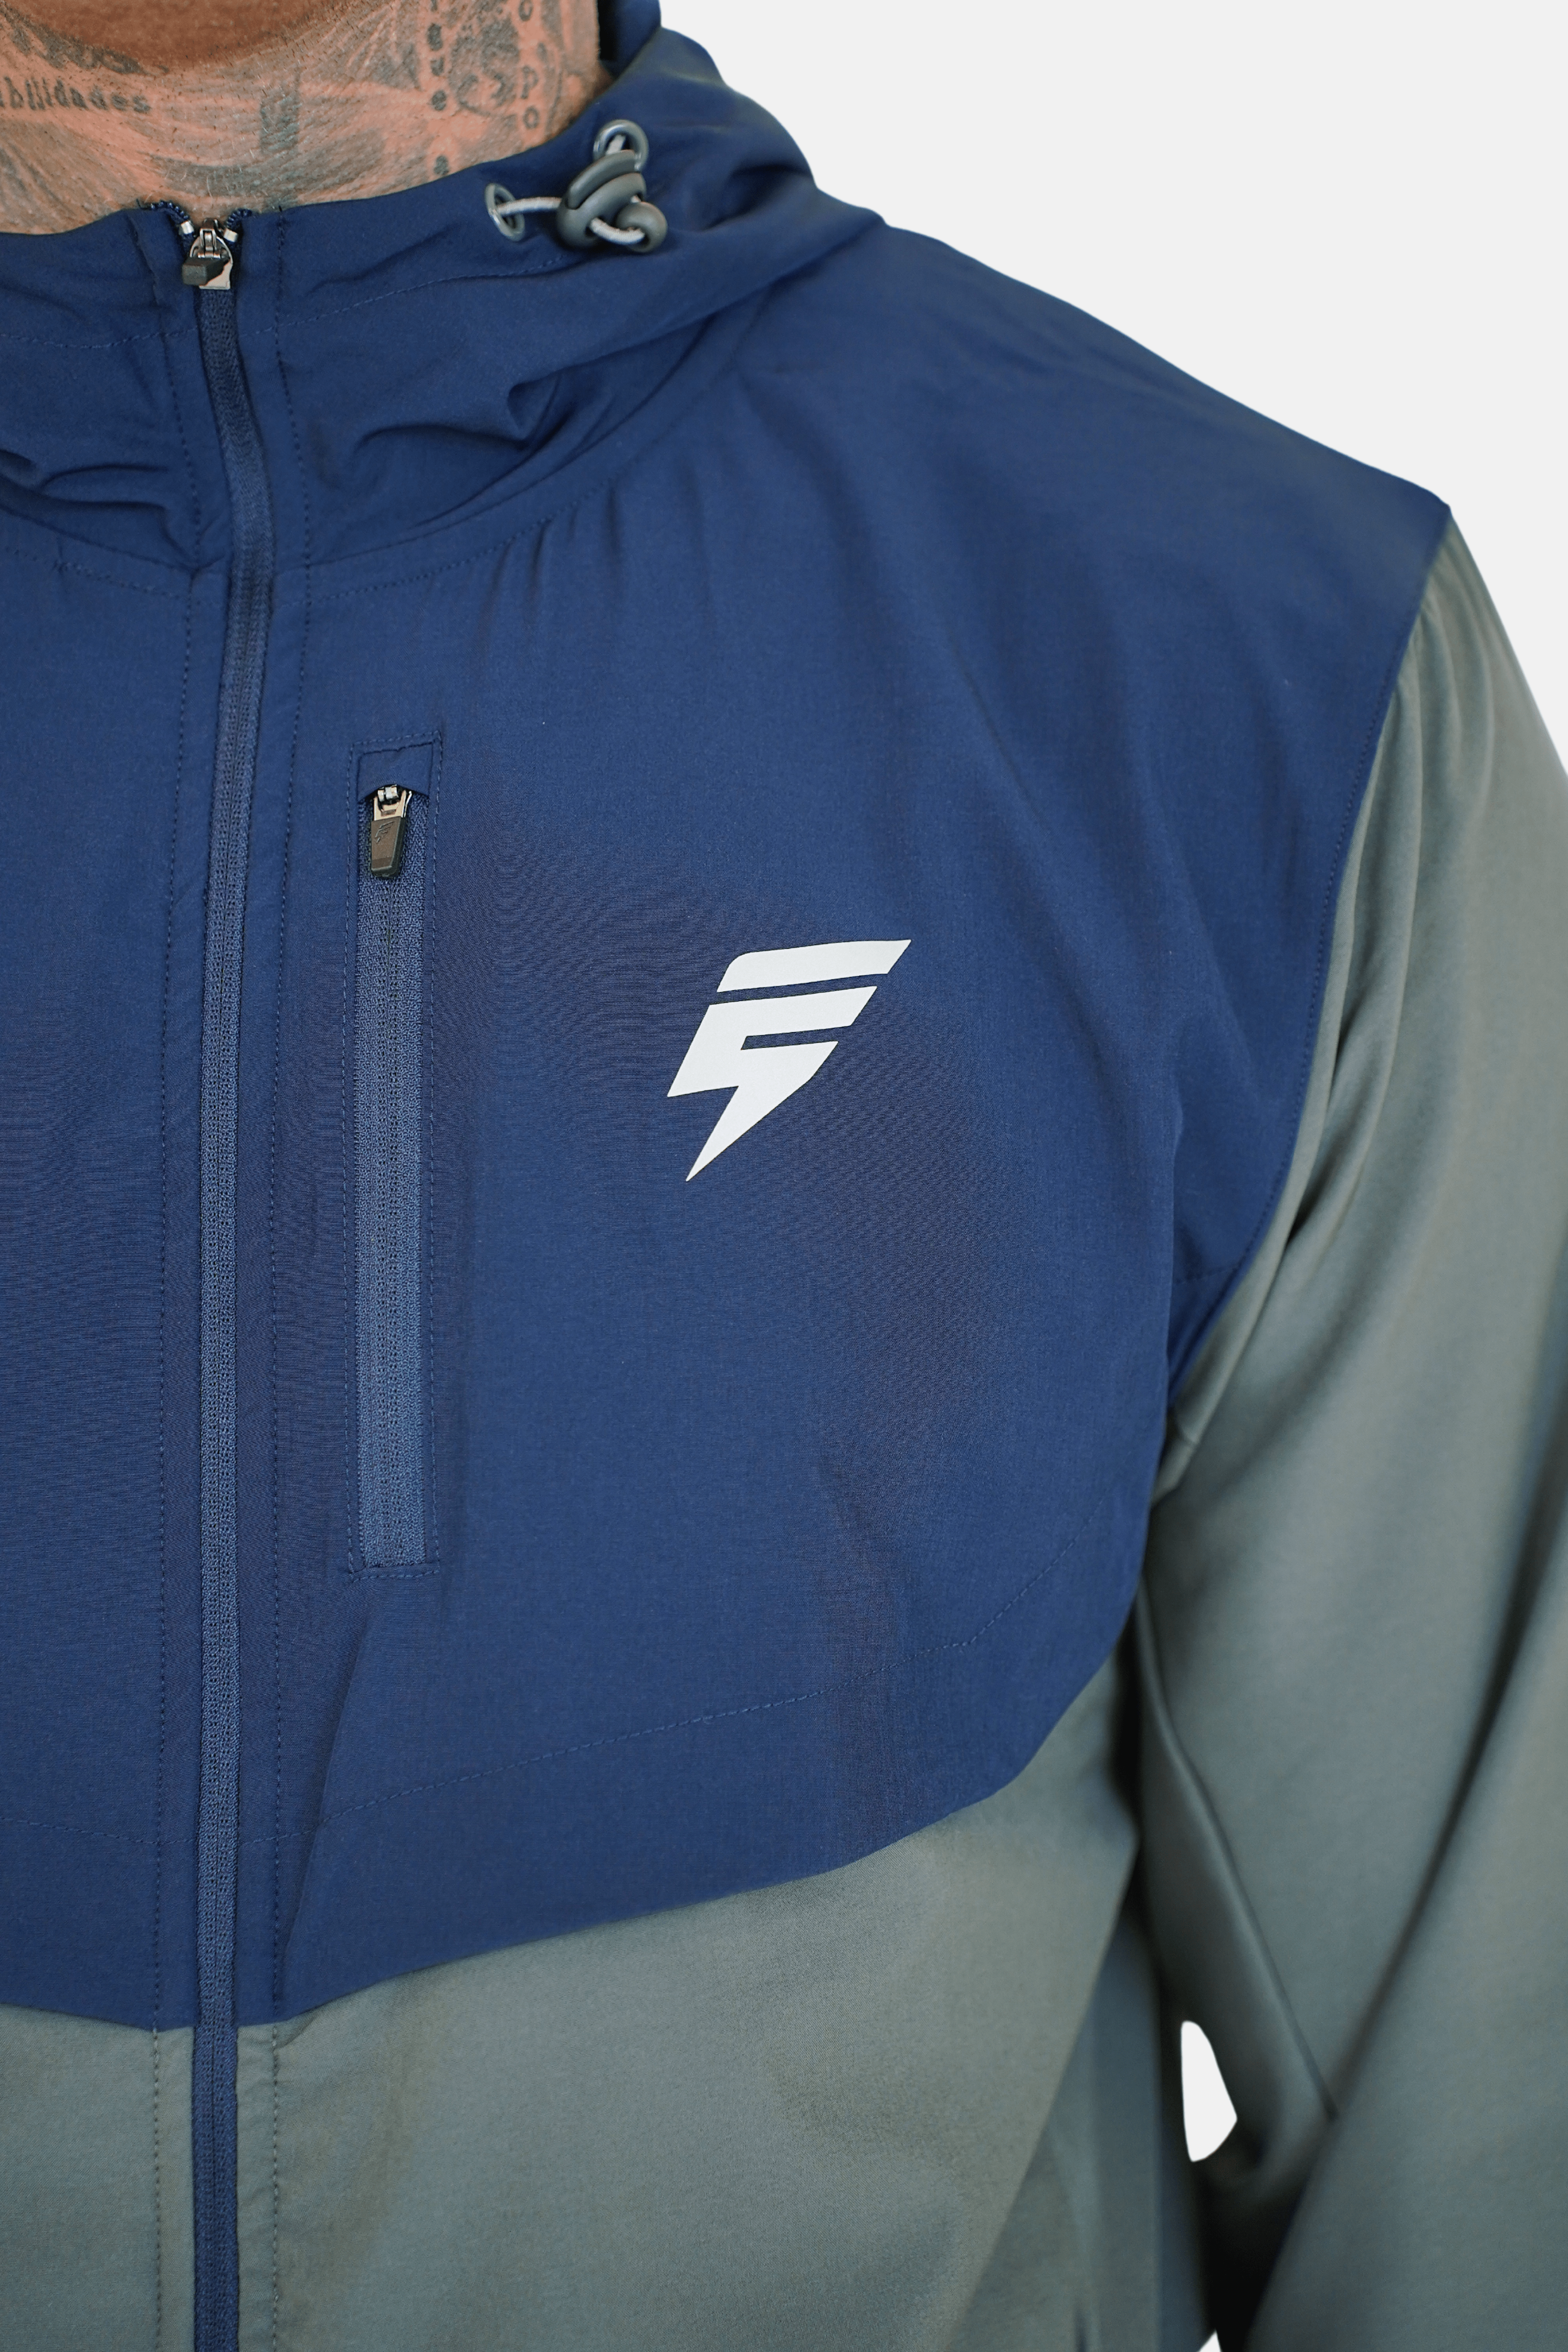 TRACK TRACKSUIT - CHARCOAL/NAVY